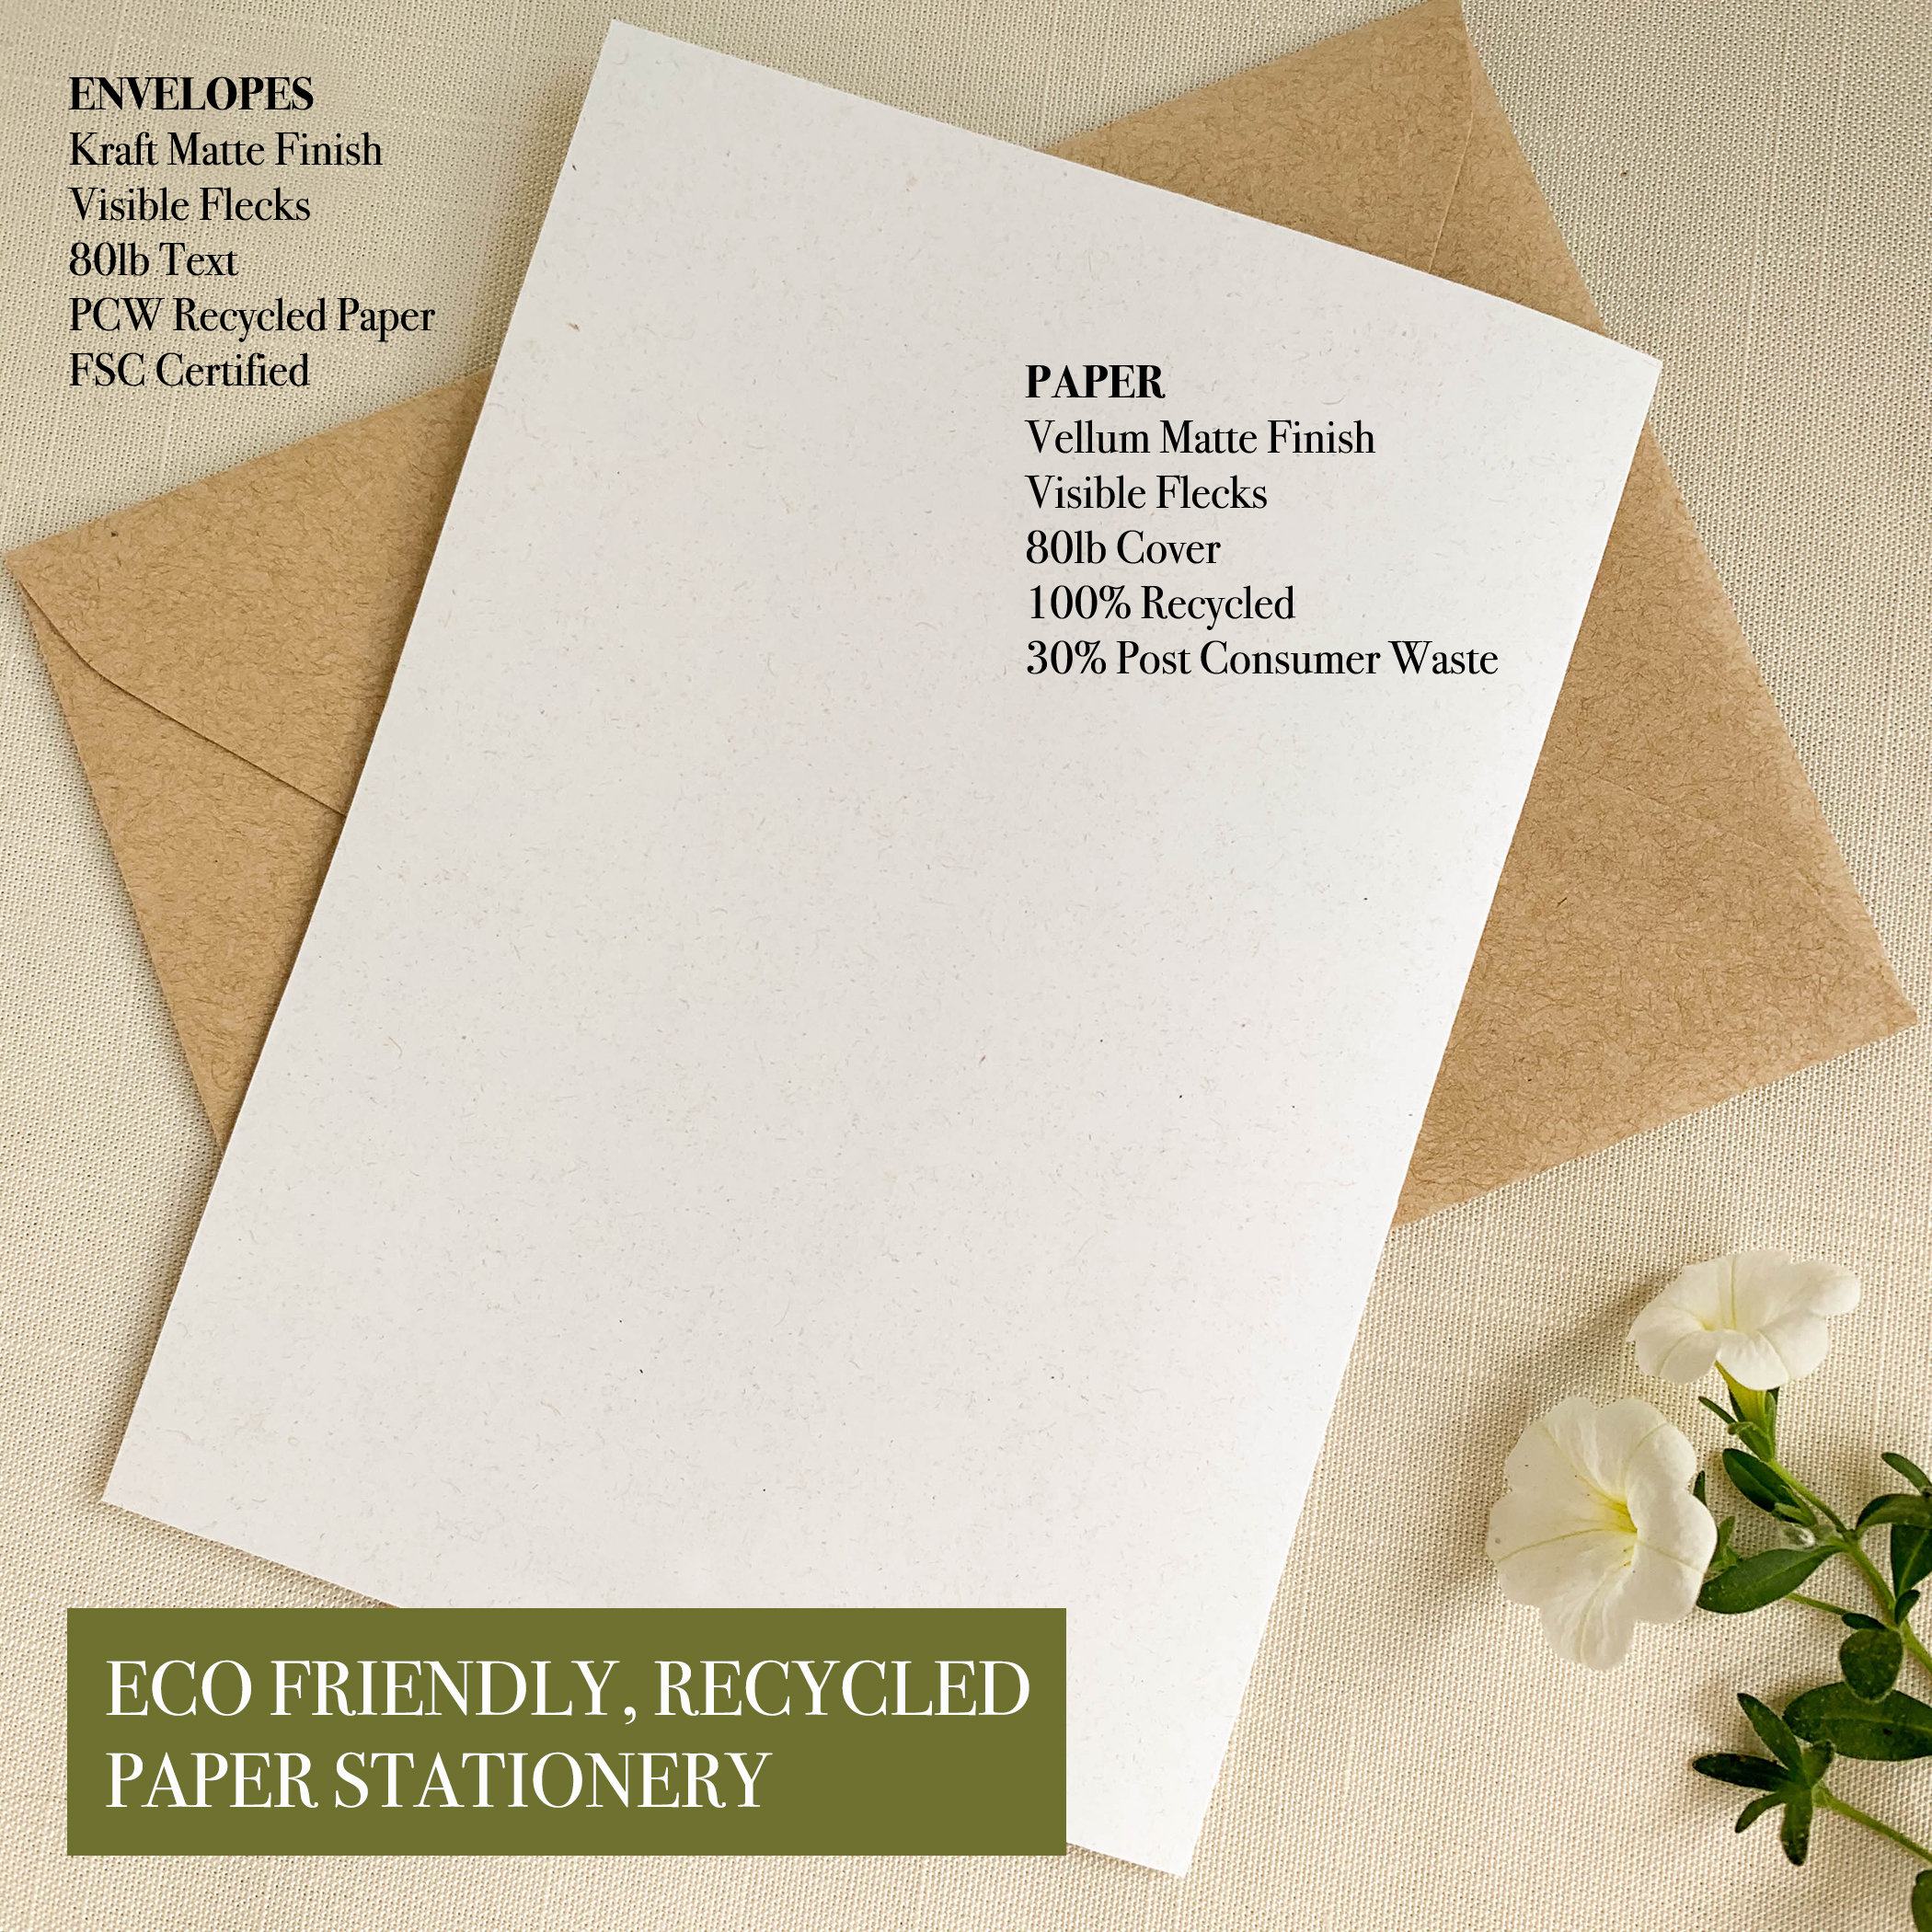 Blank Cards and Envelopes, 20 White Greeting Cards with Heavy Cardstock Paper, 6.25 x 4.5 in. FSC-Certified, Eco-Friendly Stationary Set Printable